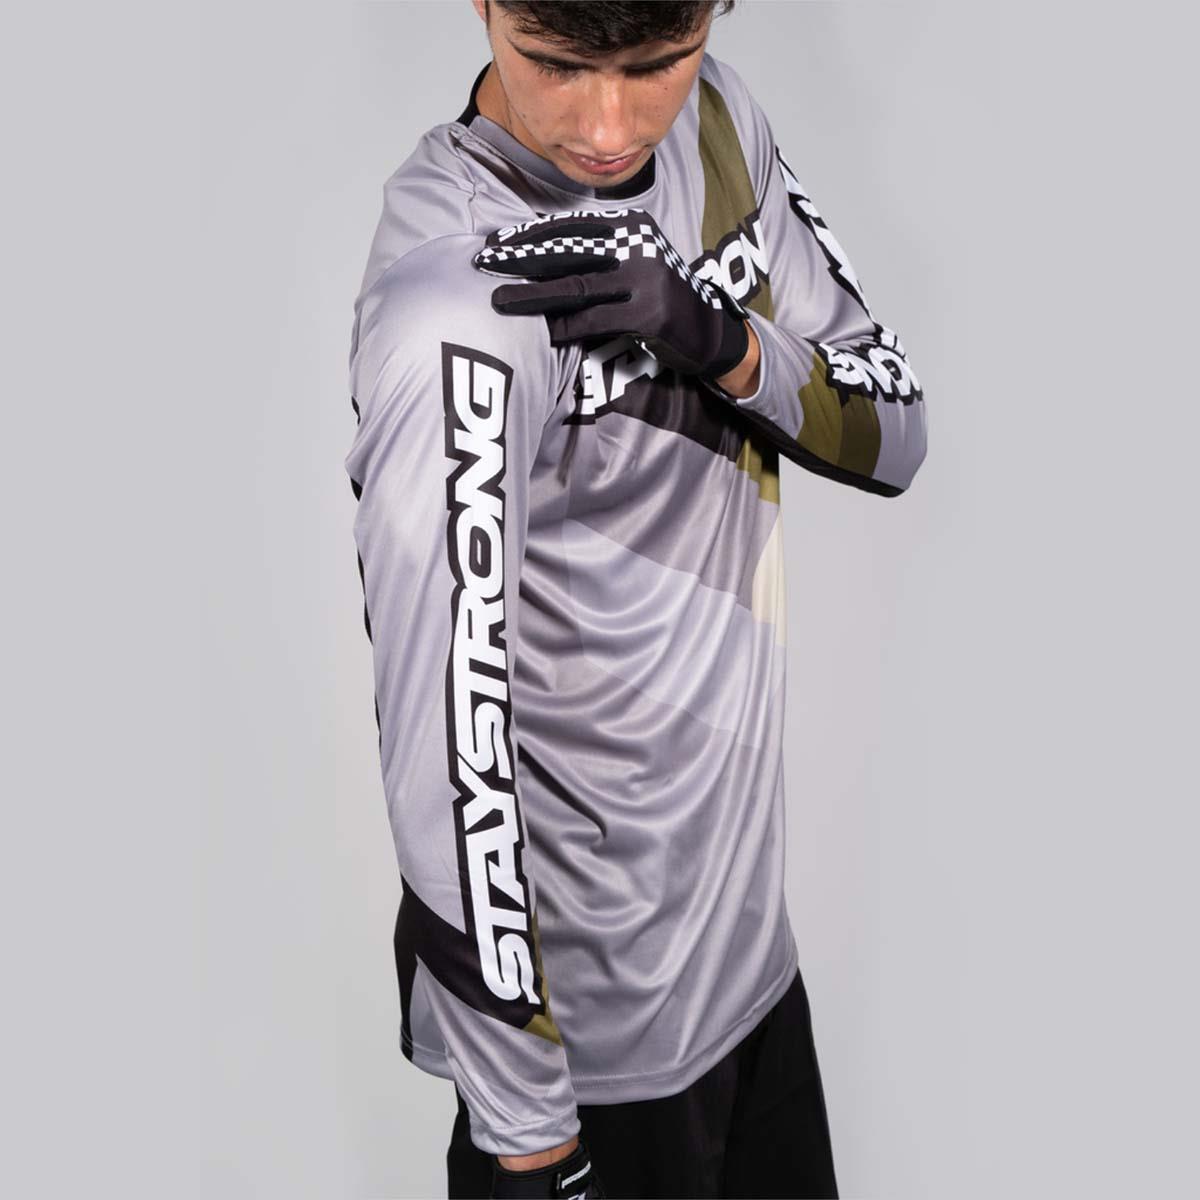 Stay Strong Chevron Race Jersey - Gray